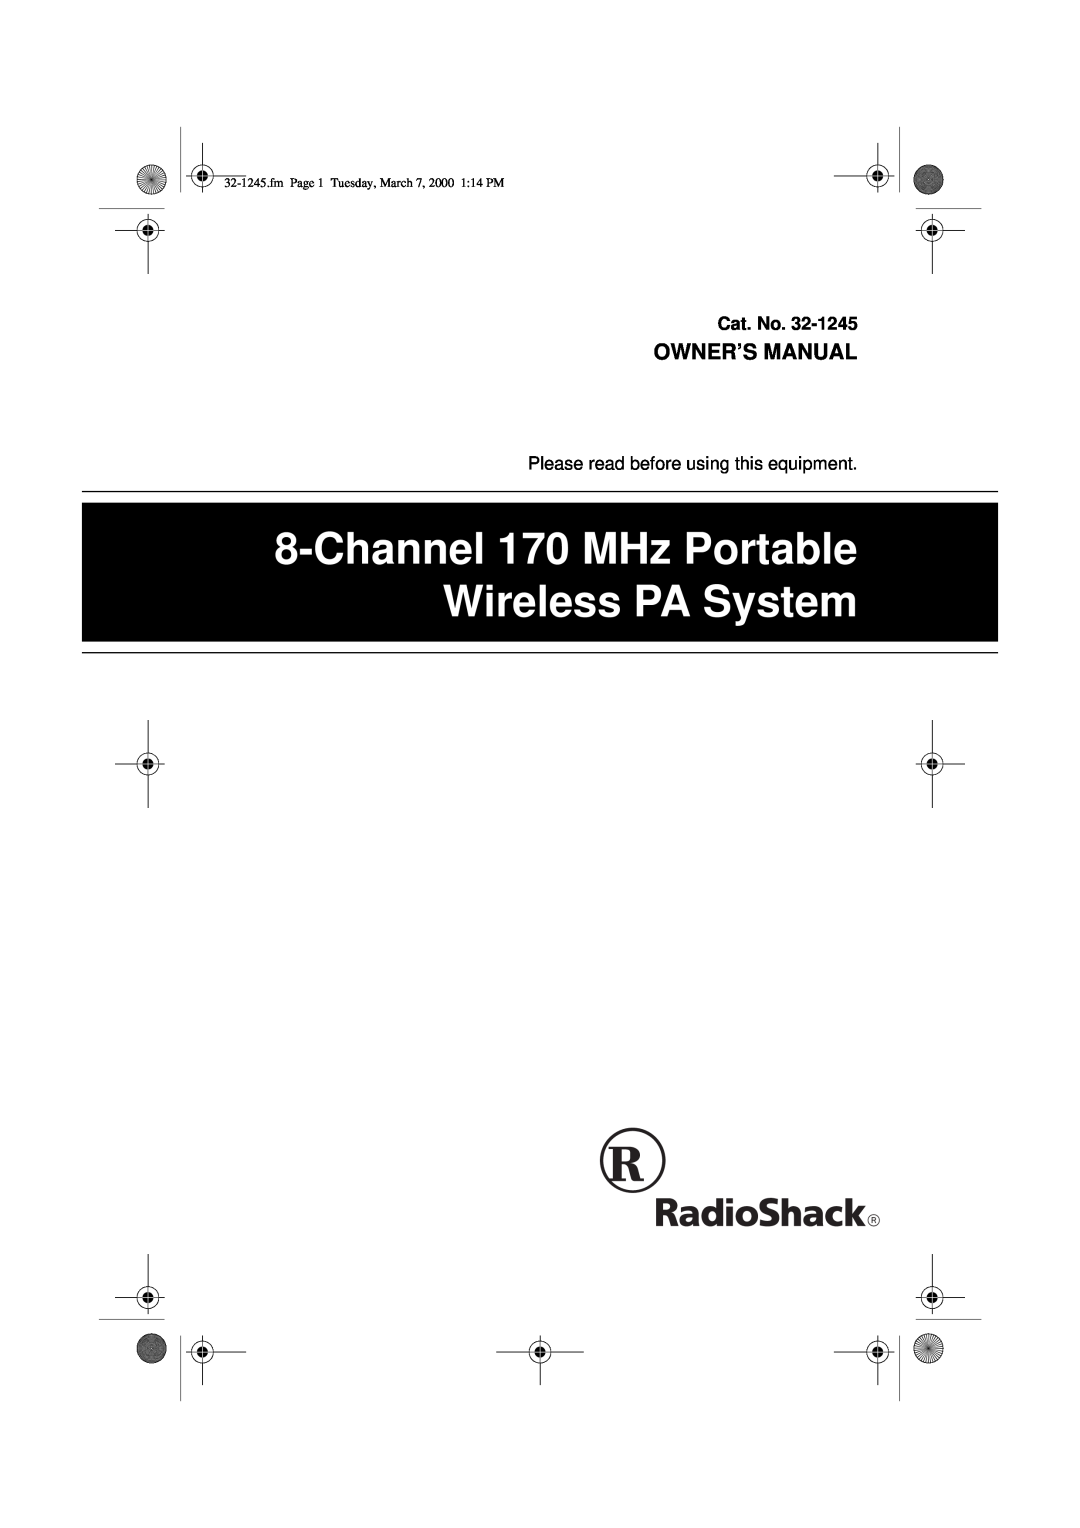 Ricoh 32-1245 owner manual Owner’S Manual, Channel 170 MHz Portable Wireless PA System 